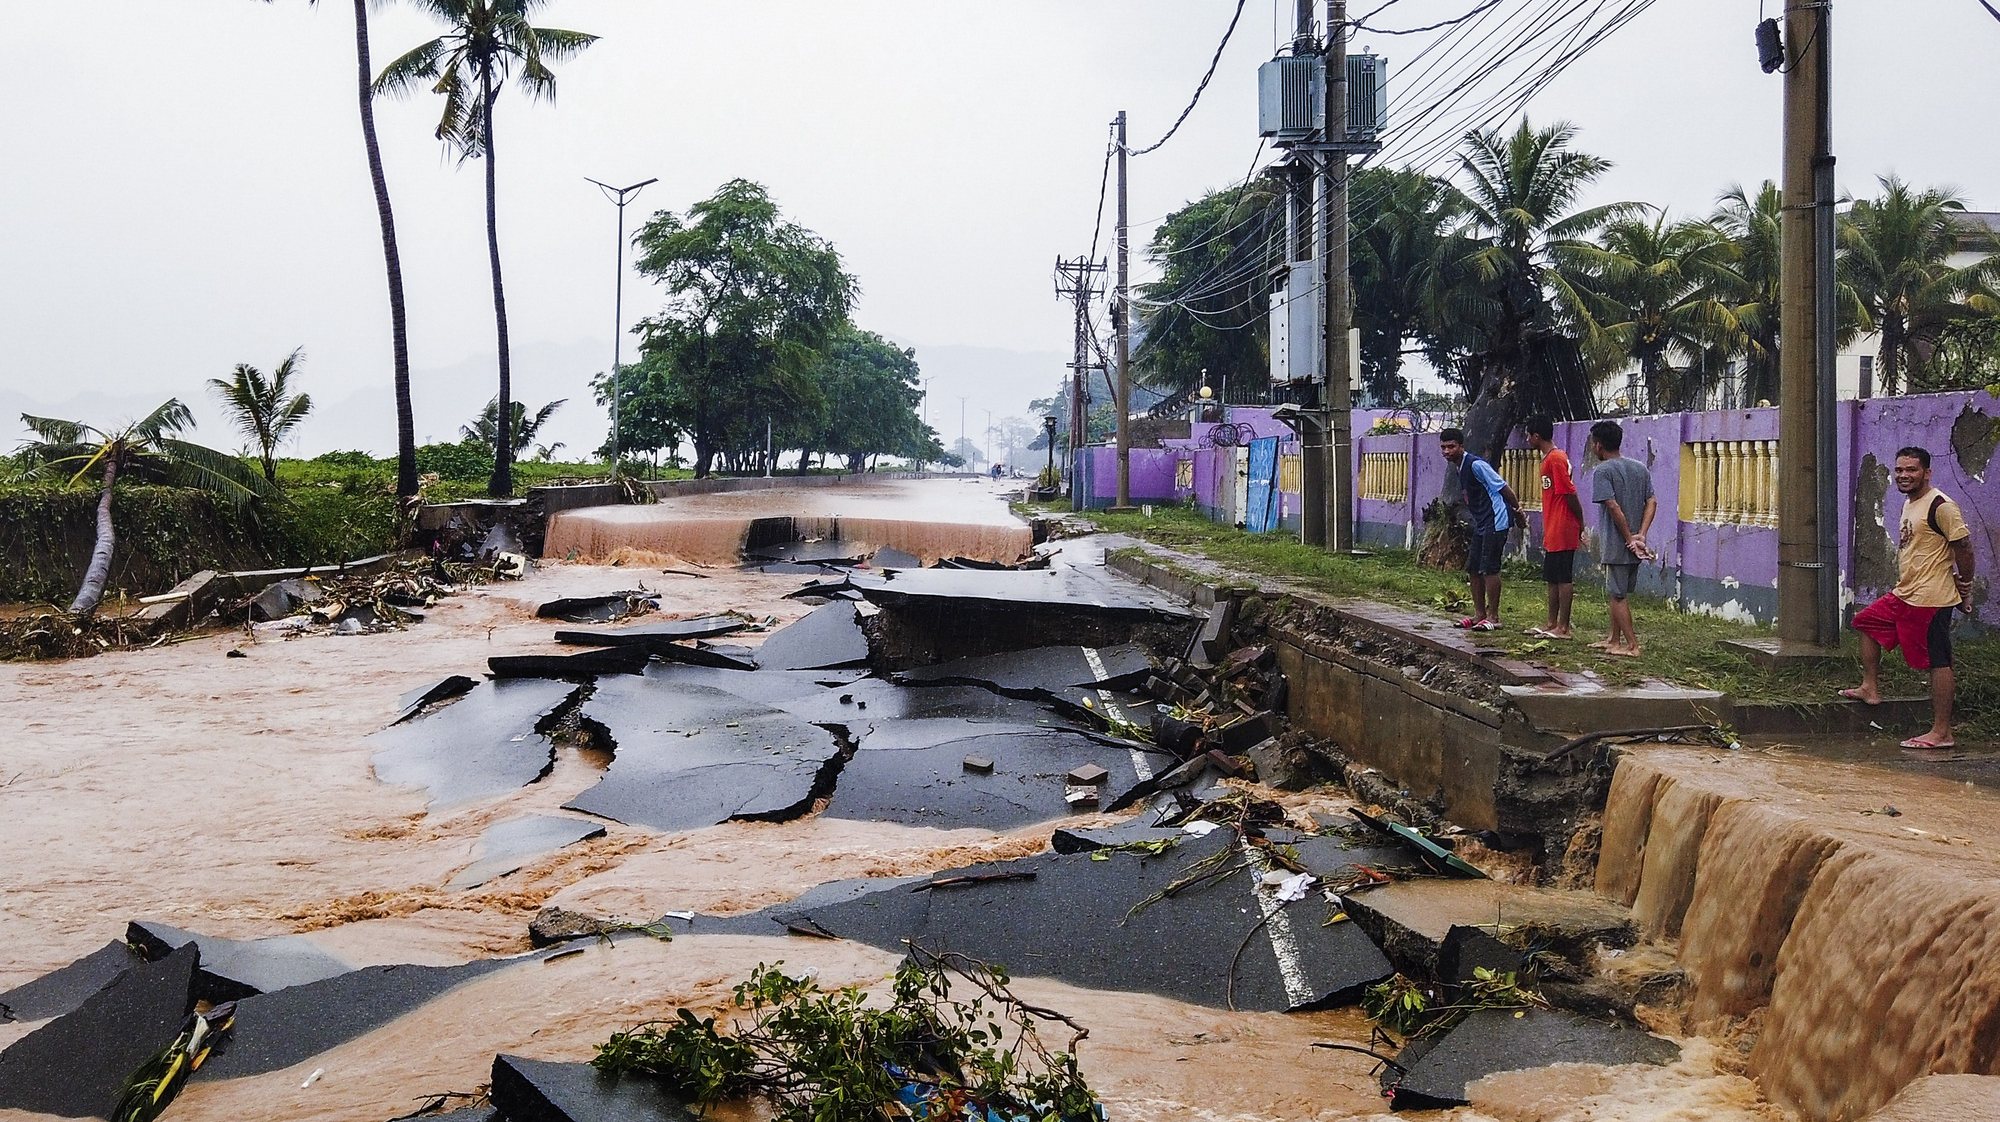 Flood damage in the streets of Dili,  East-Timor. The floods that hit a large part of the city of Dili today caused at least 11 deaths, according to an updated but still provisional balance sheet by the local Civil Protection, 04 April 2021. ANTONIO SAMPAIO/LUSA